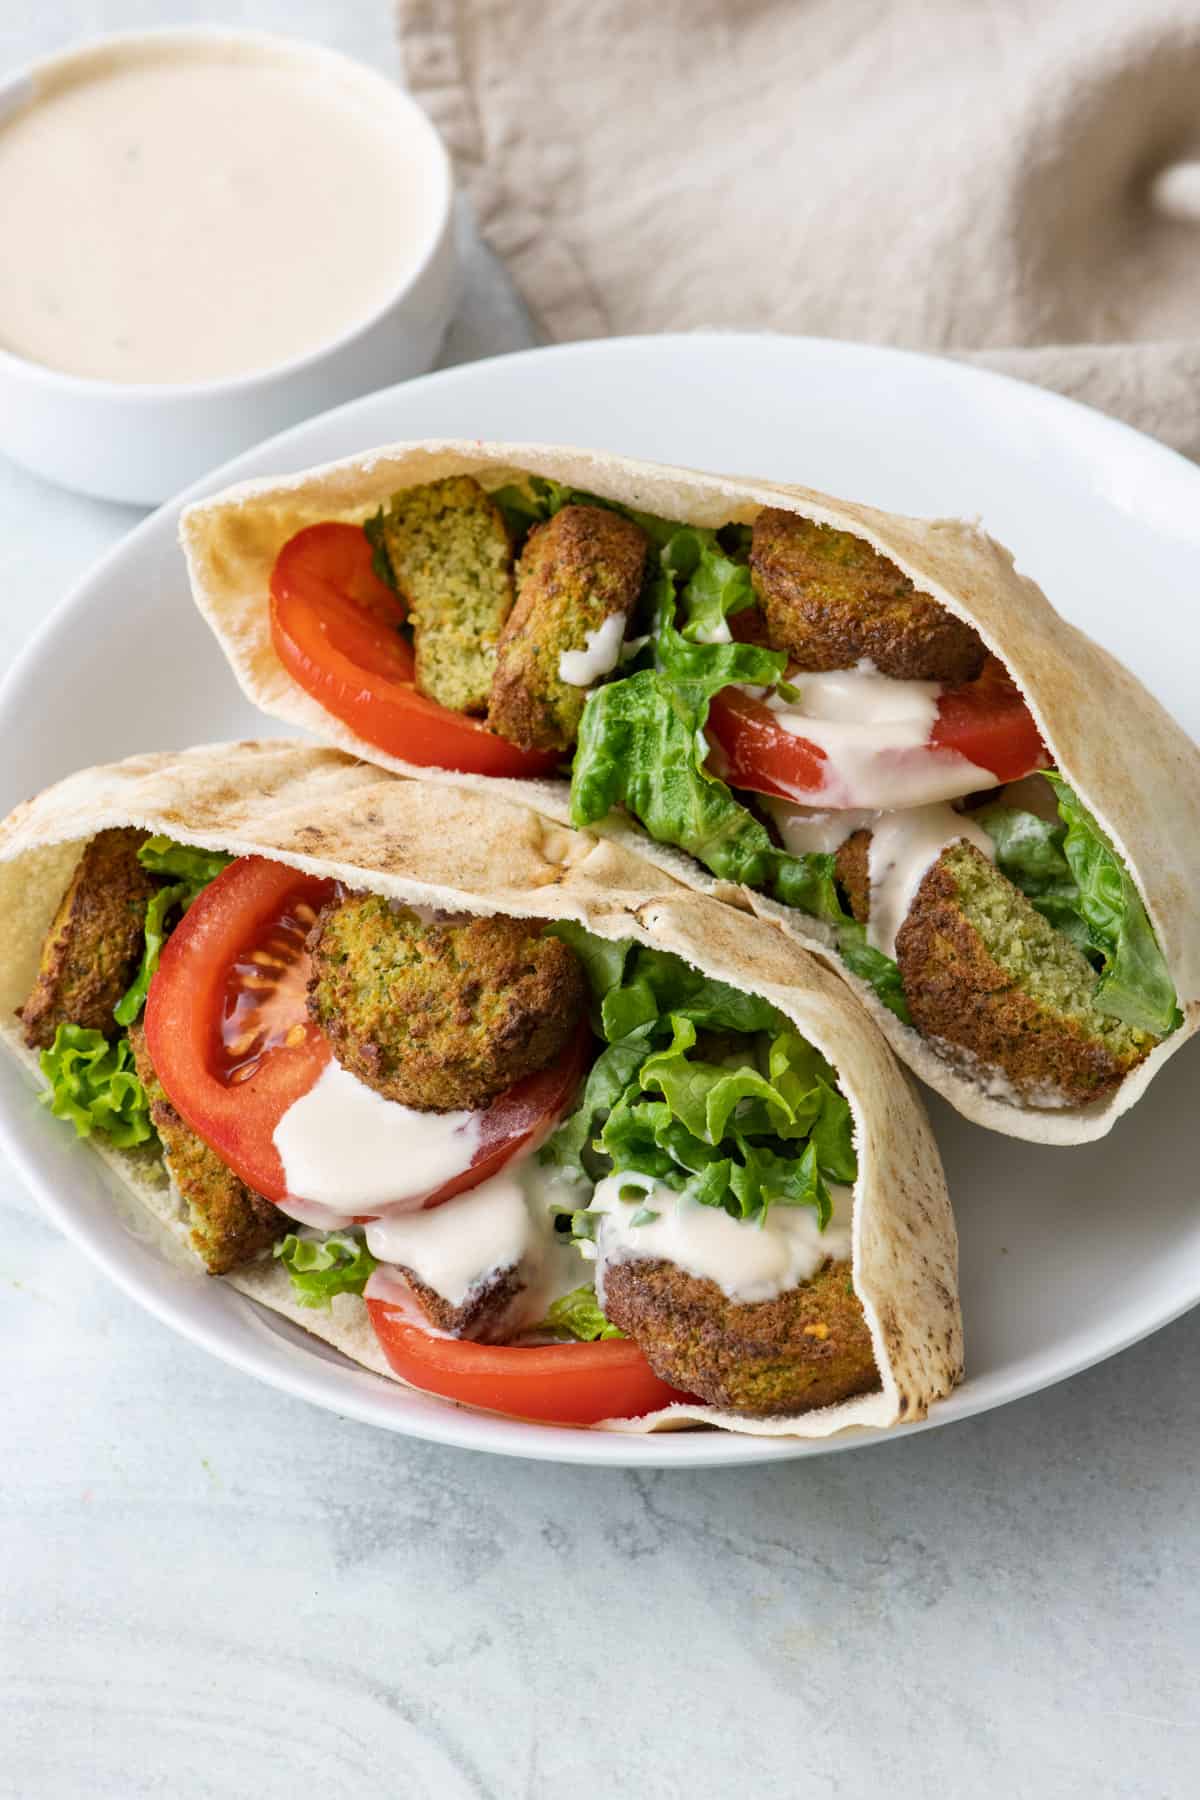 2 pita pockers with lettuce, falafels, tomato slices, and tahini sauce drizzled inside.